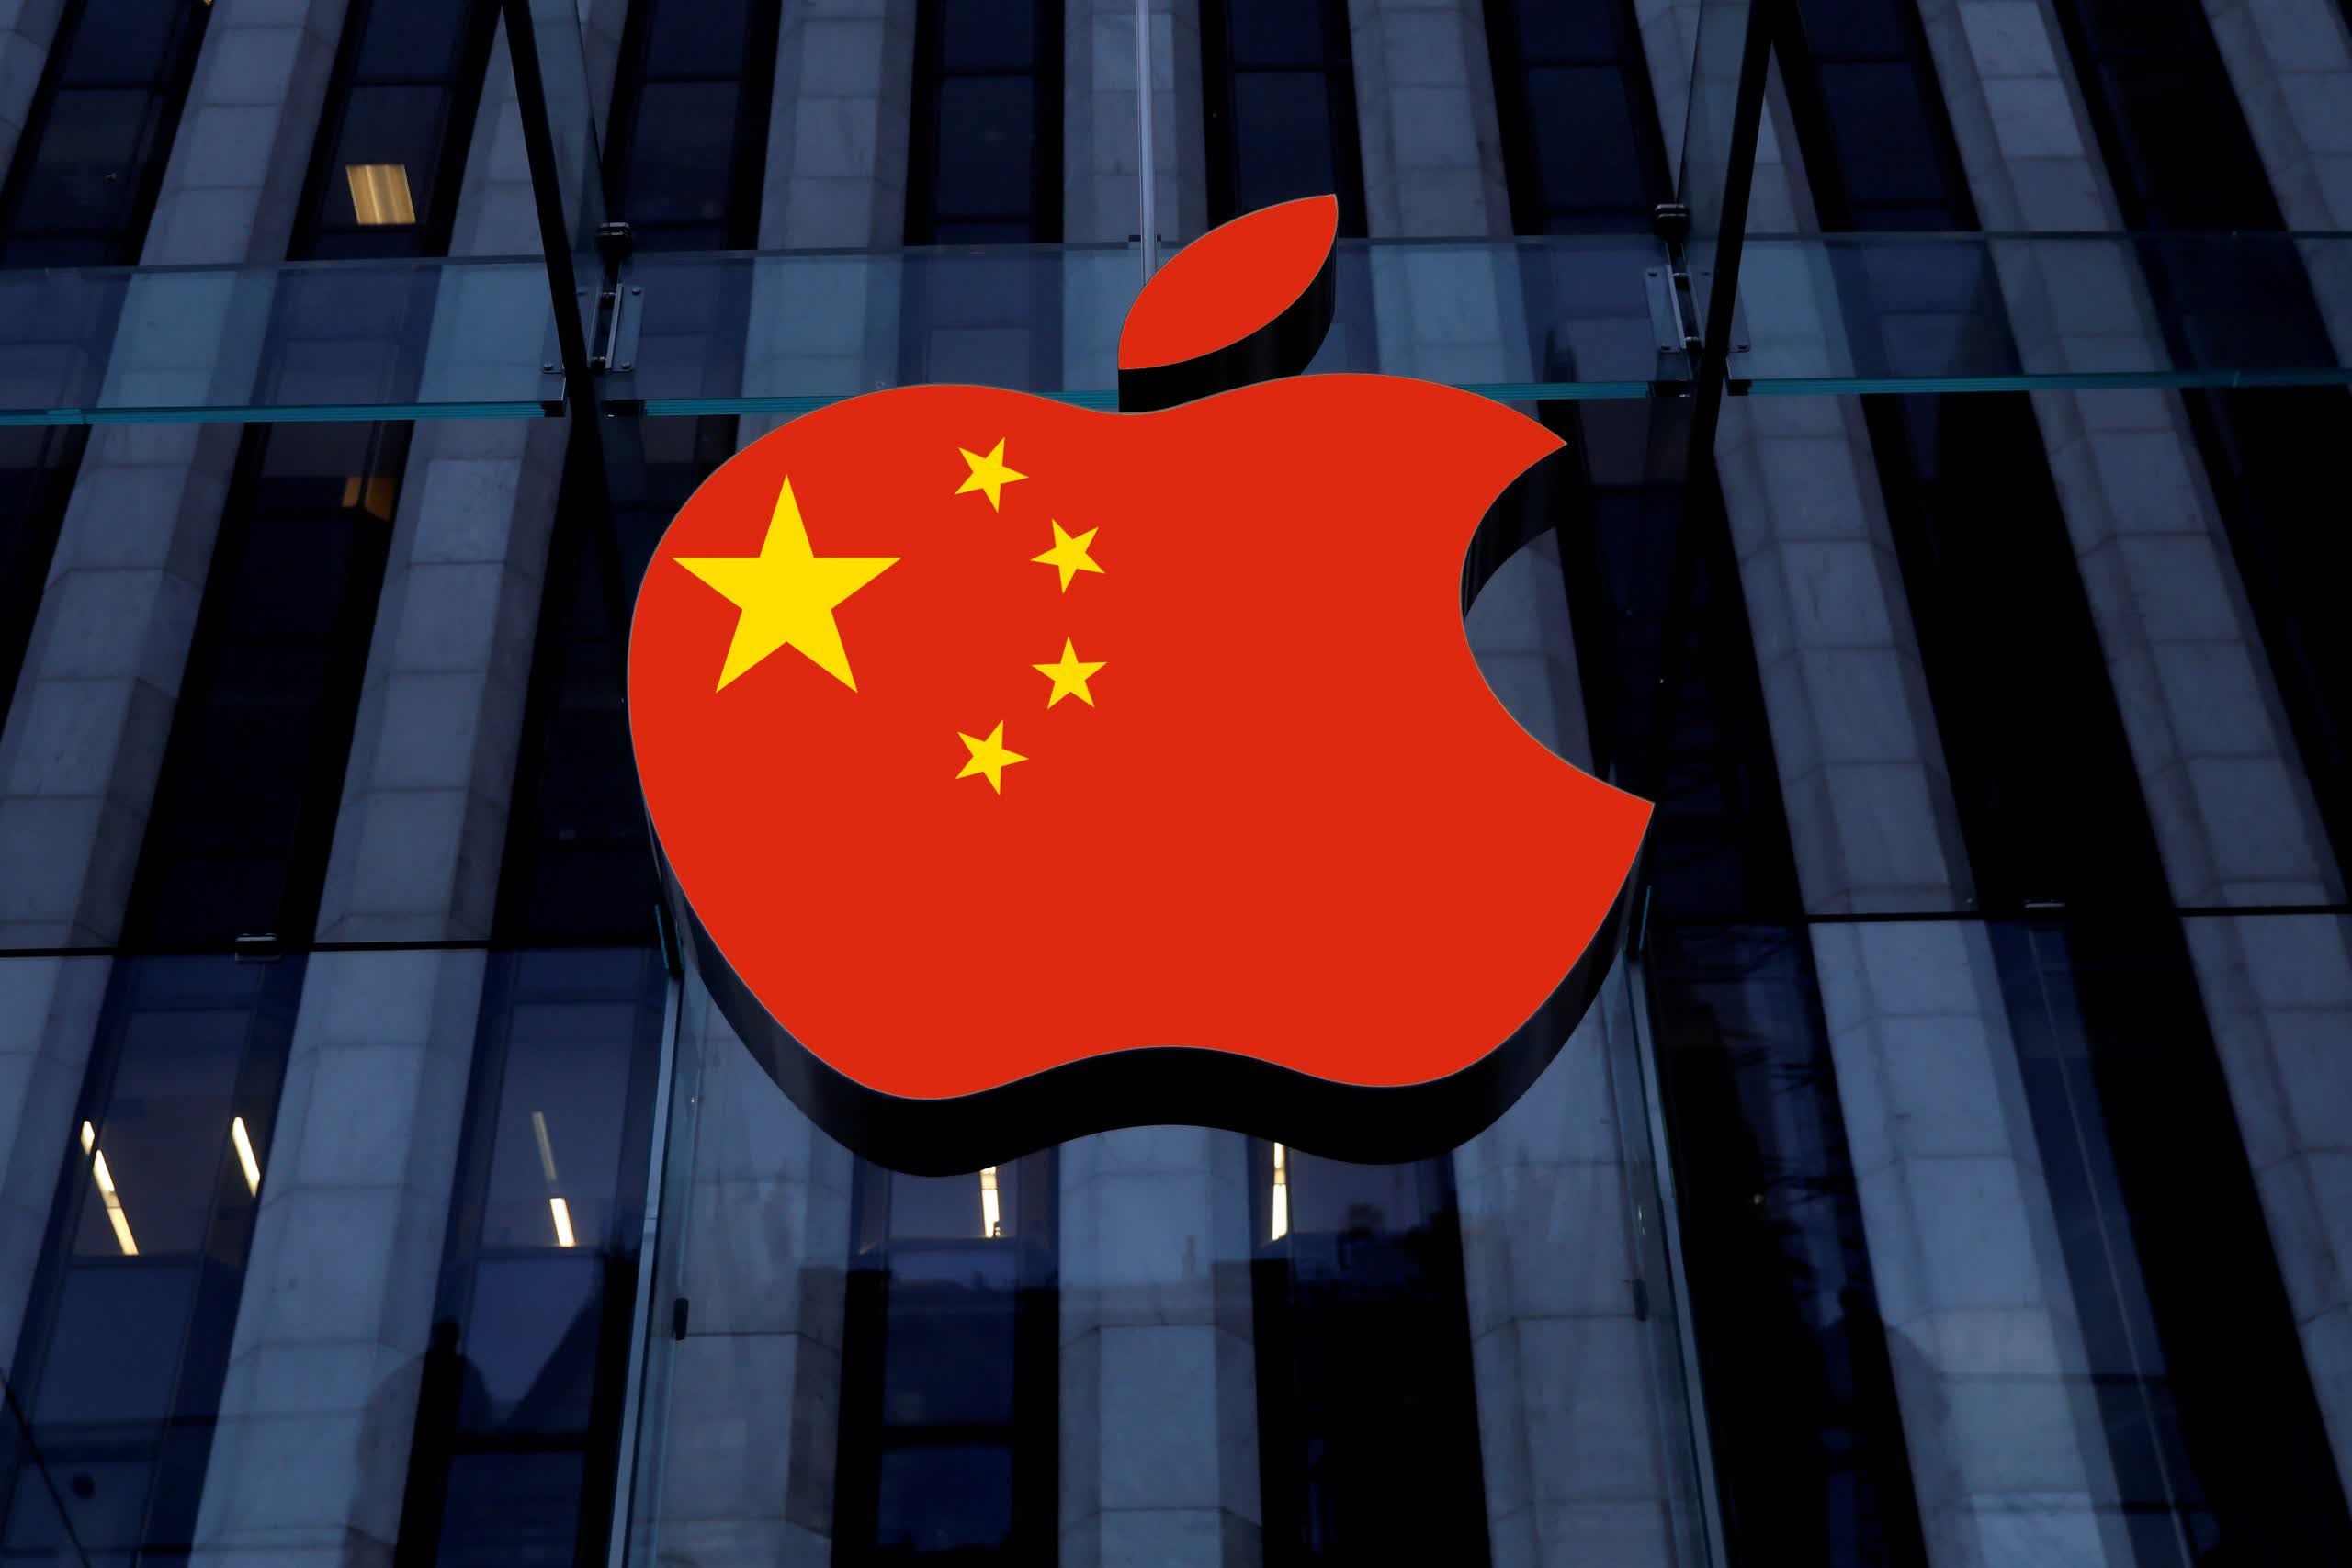 China tells Tim Cook it is committed to Apple relationship, welcomes foreign enterprises